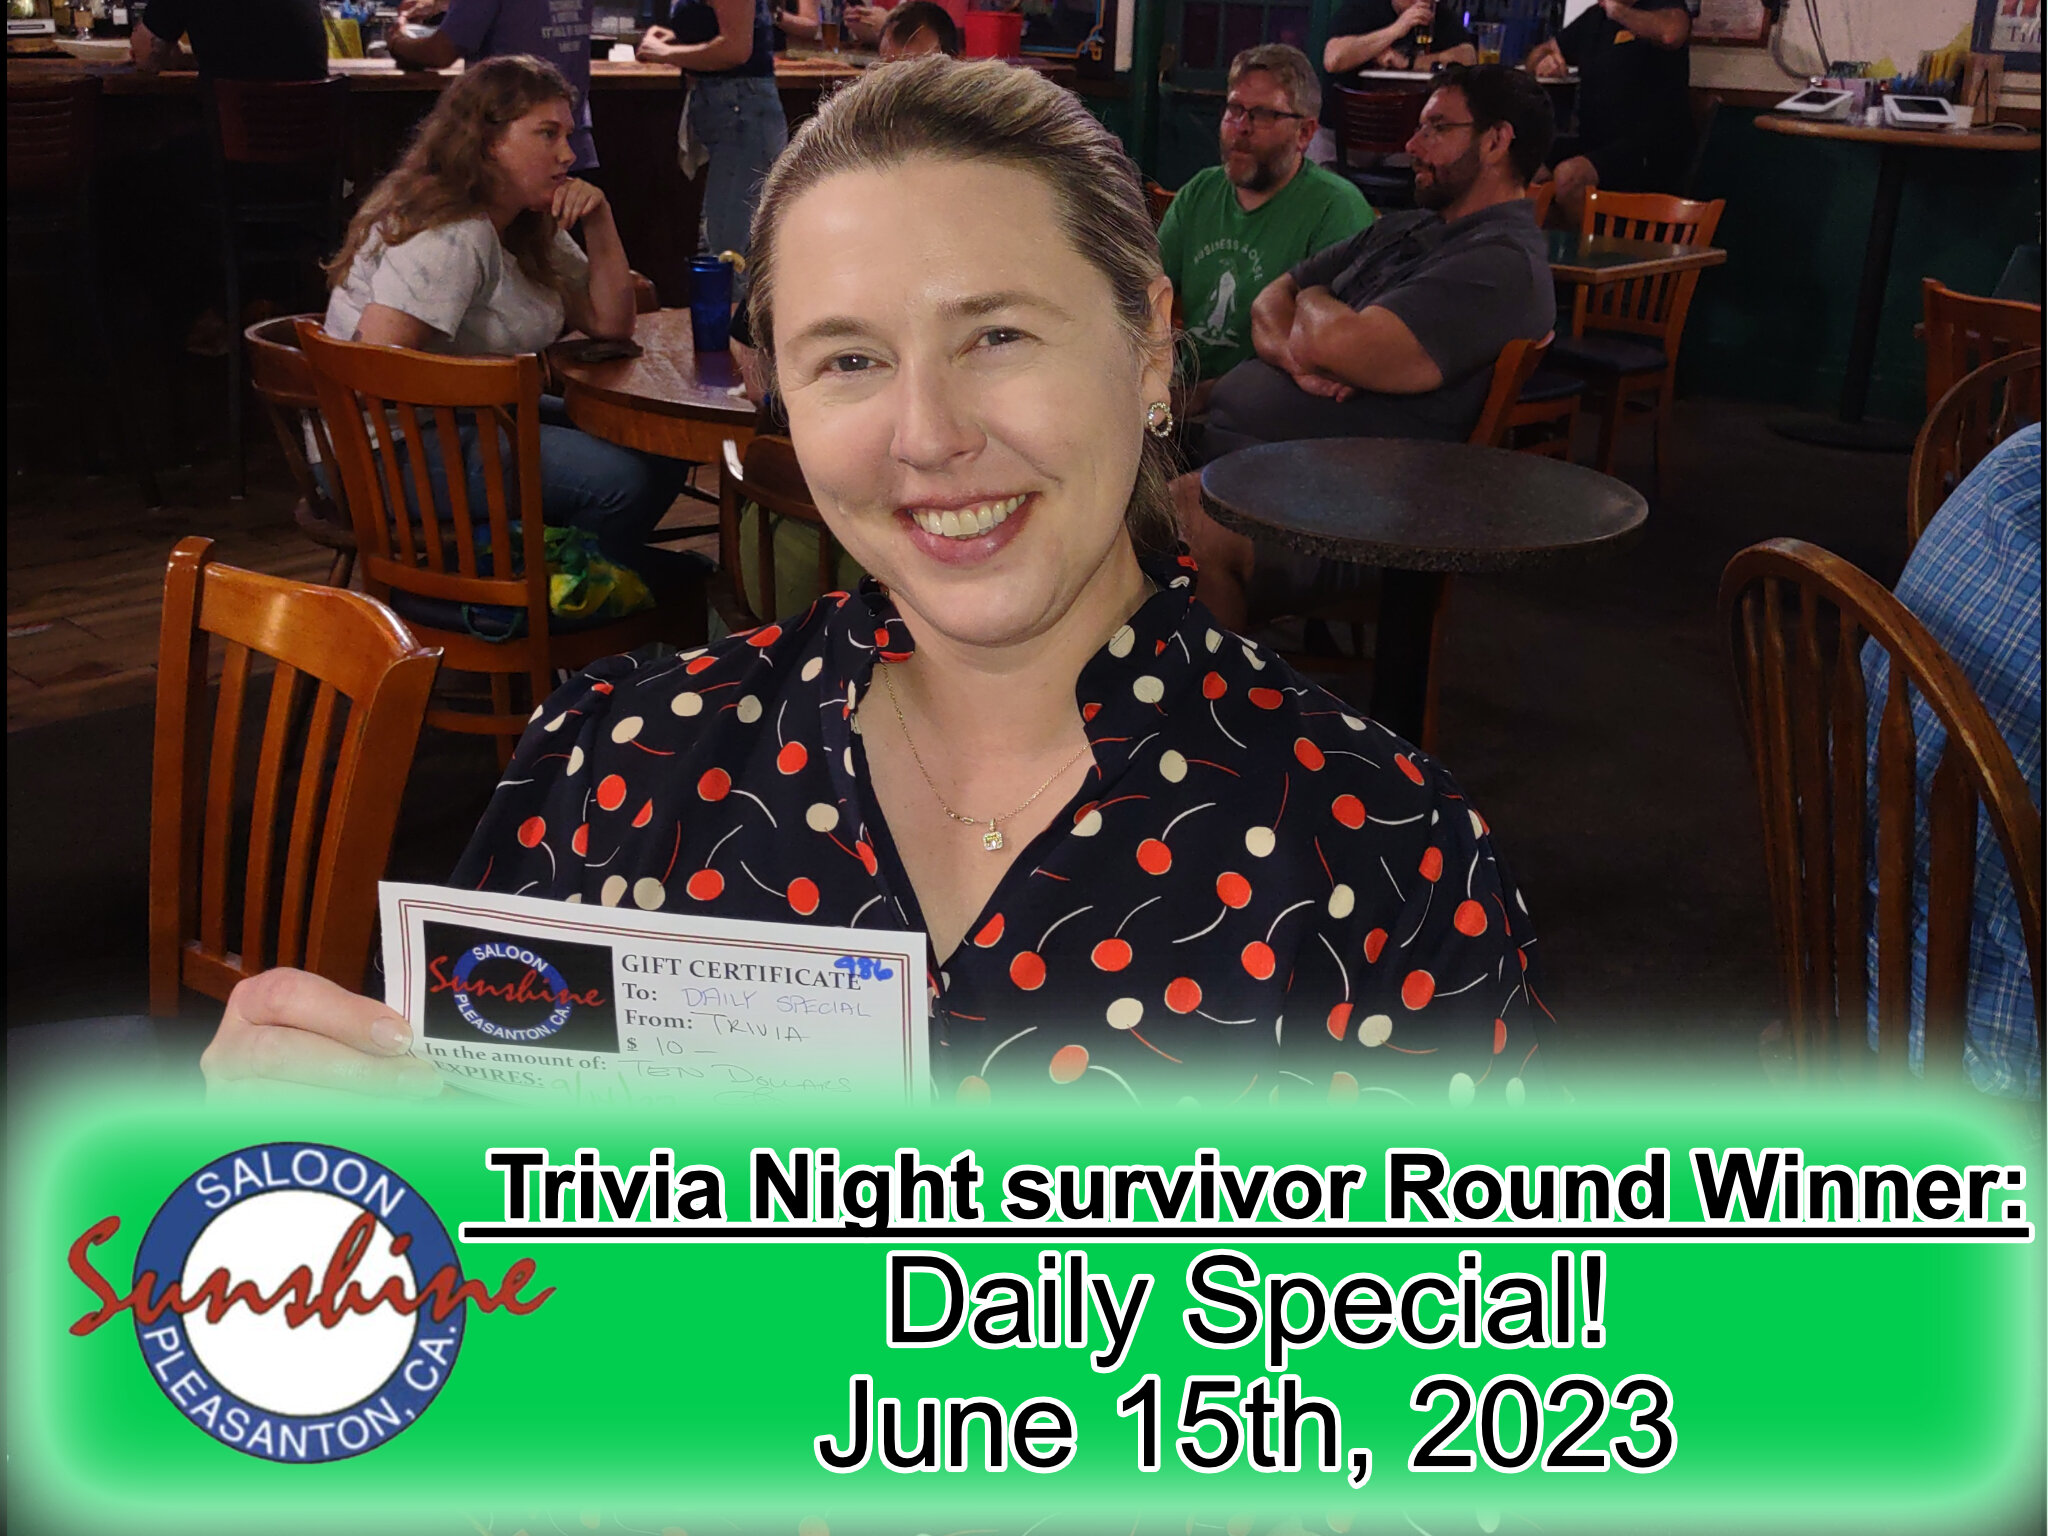 Congratulations to &quot;Rock, Paper, Quizzers&quot; for getting top score at last weeks Thursday night Trivia!
Join us Thursday night for multiple rounds of trivia, multiple chances to win a gift certificate, and multiple chances for a spot on the h